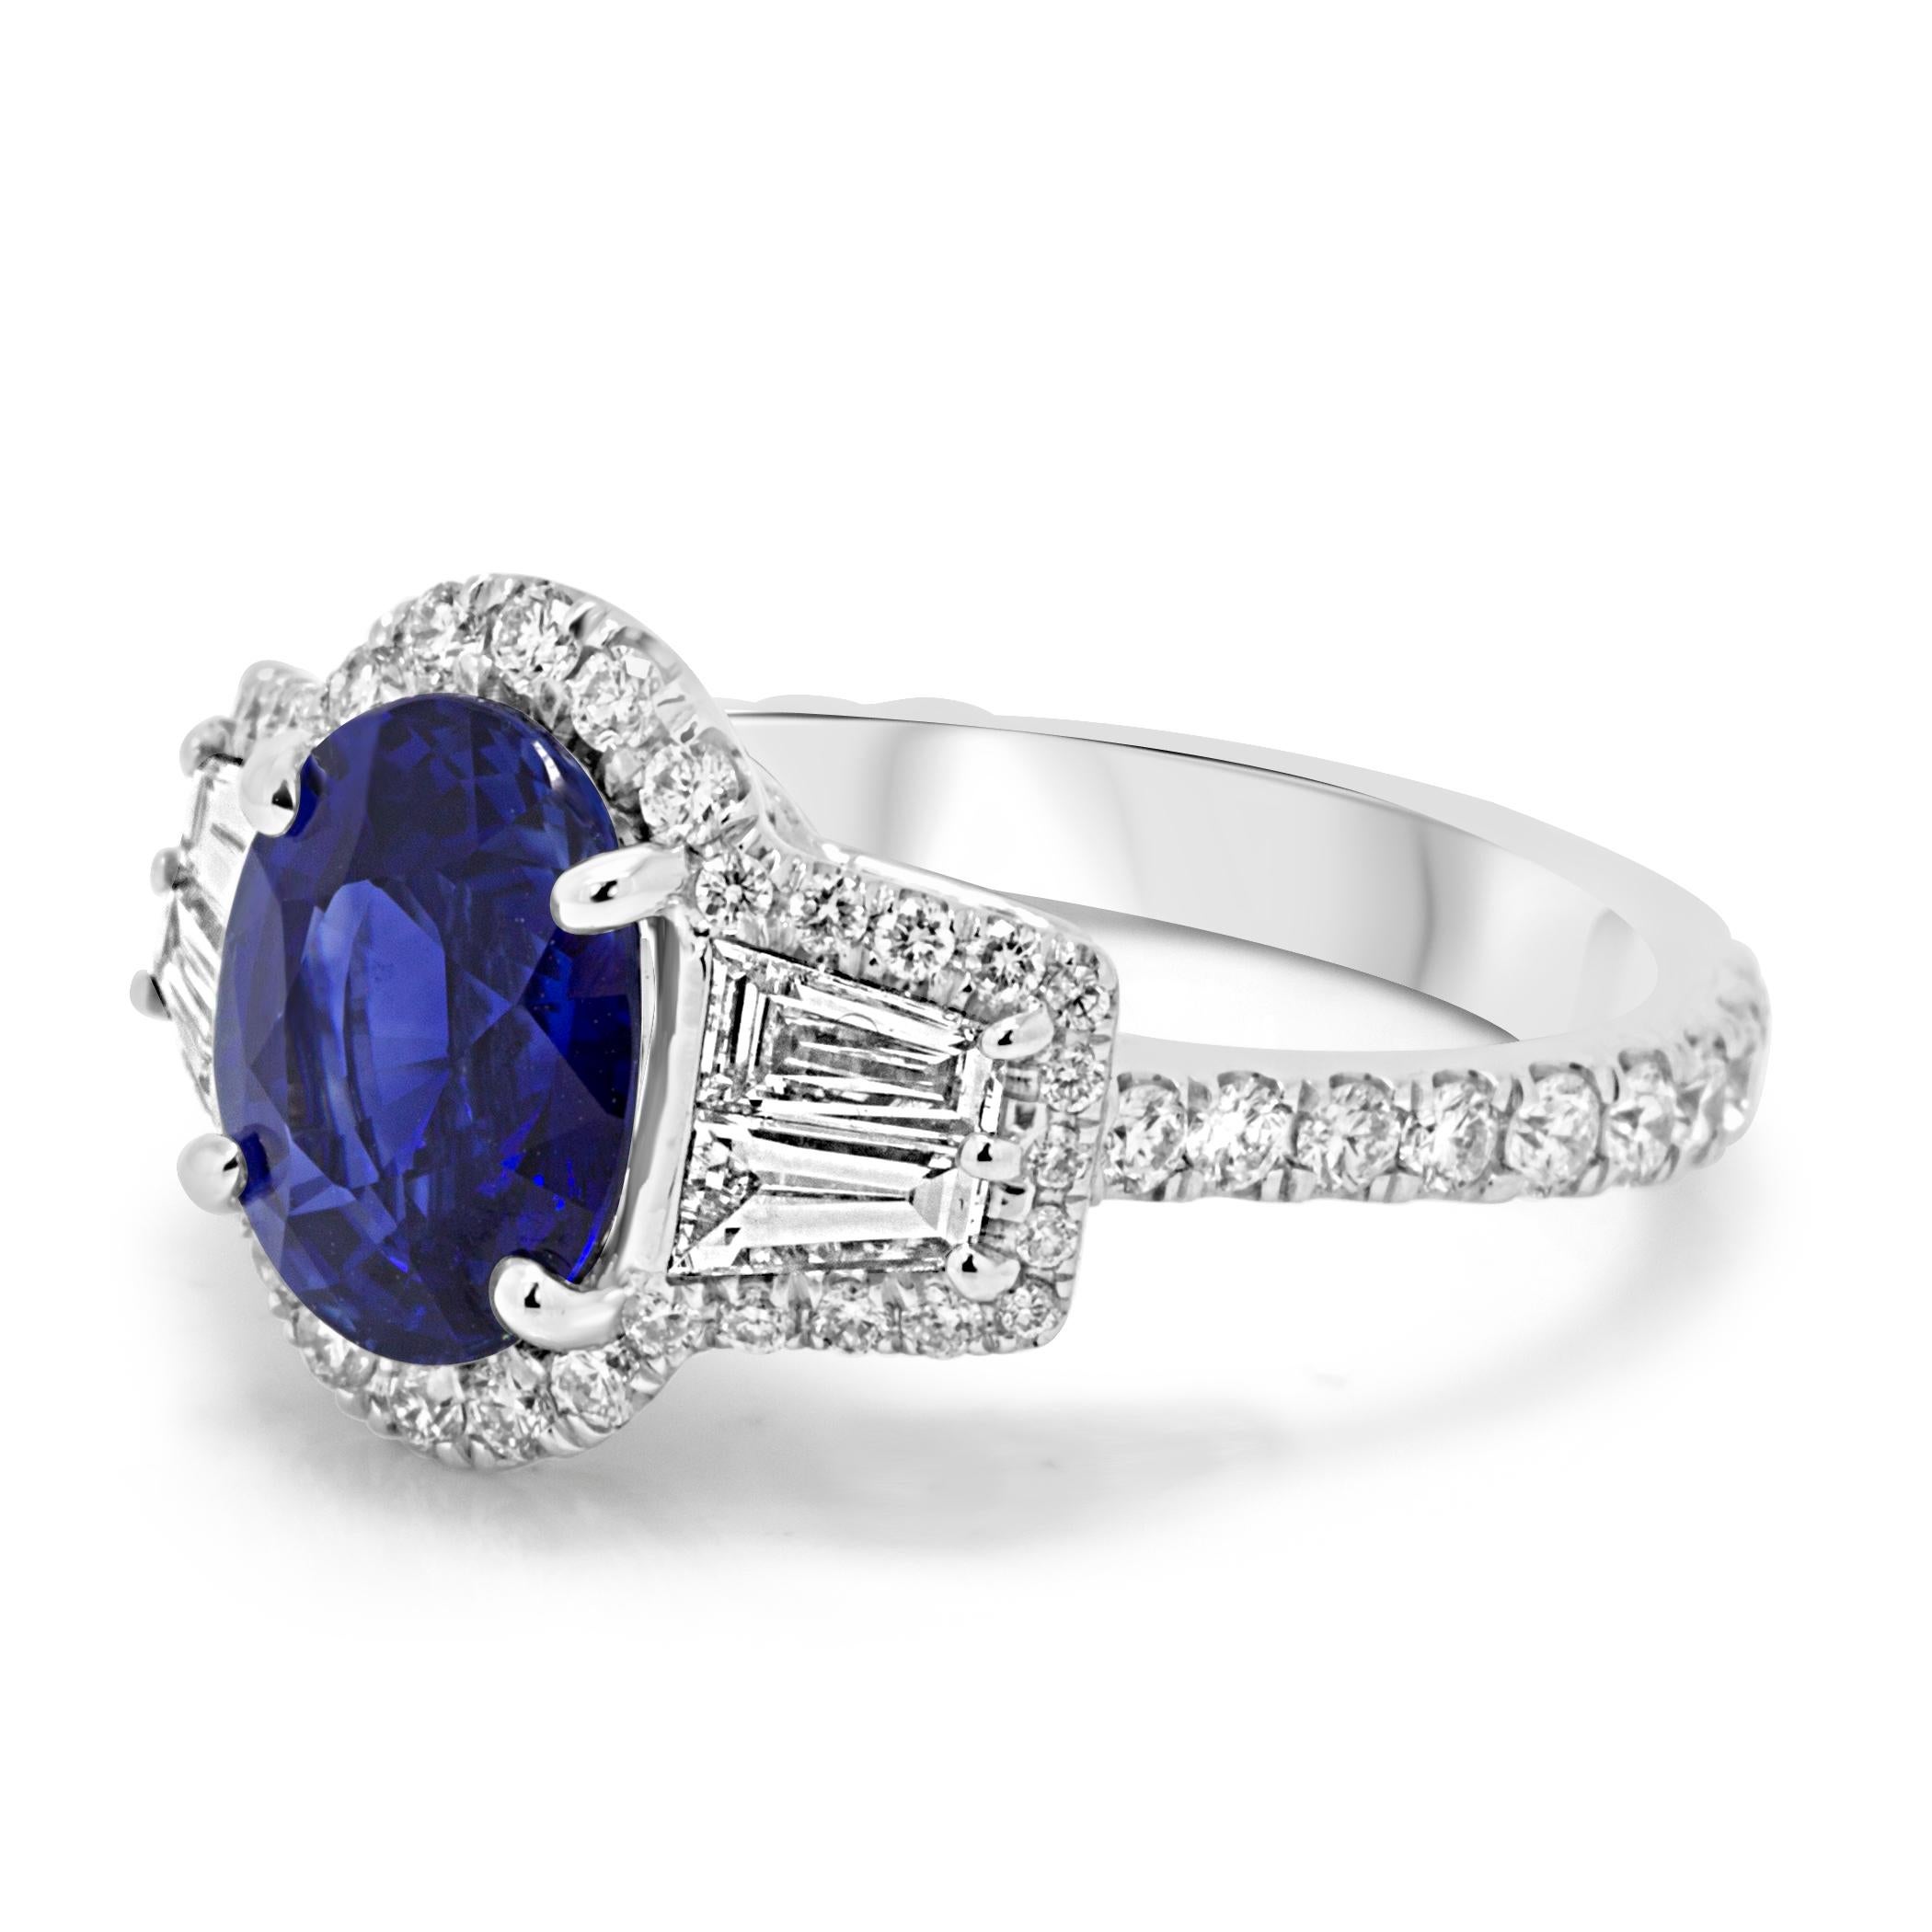 Super Gorgeous GIA Certified Blue Sapphire Oval 3.34 Carat  Flanked by 4 White Diamond Baguettes on the side 0.53 Carat encircled in a Single Halo of White Round Diamonds 0.79 Carat in Hand Made 18K White Gold Ring.

Style available in different